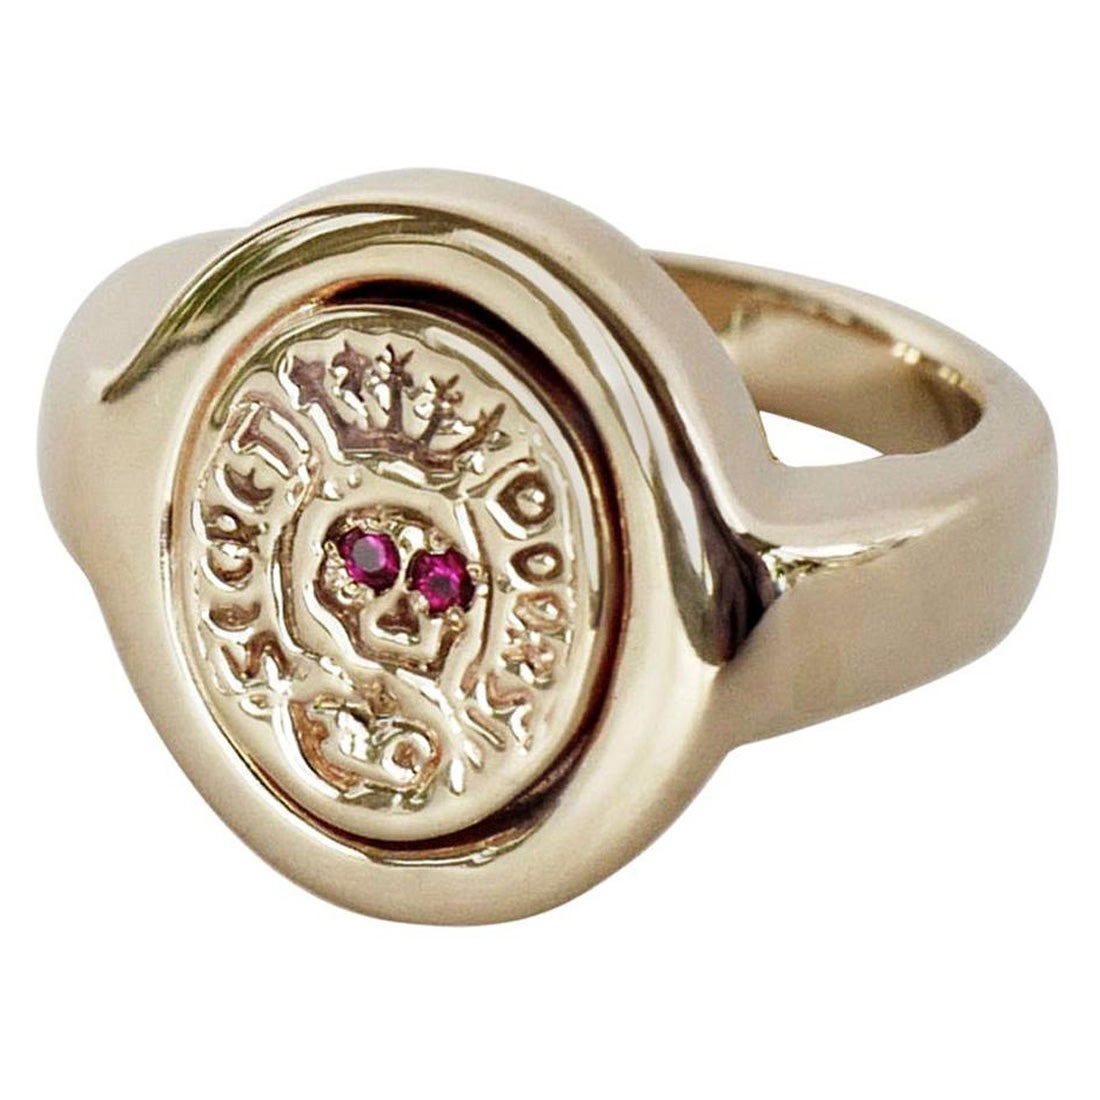 Crest Signet Ring Ruby Skull Bronze Victorian Style J Dauphin For Sale